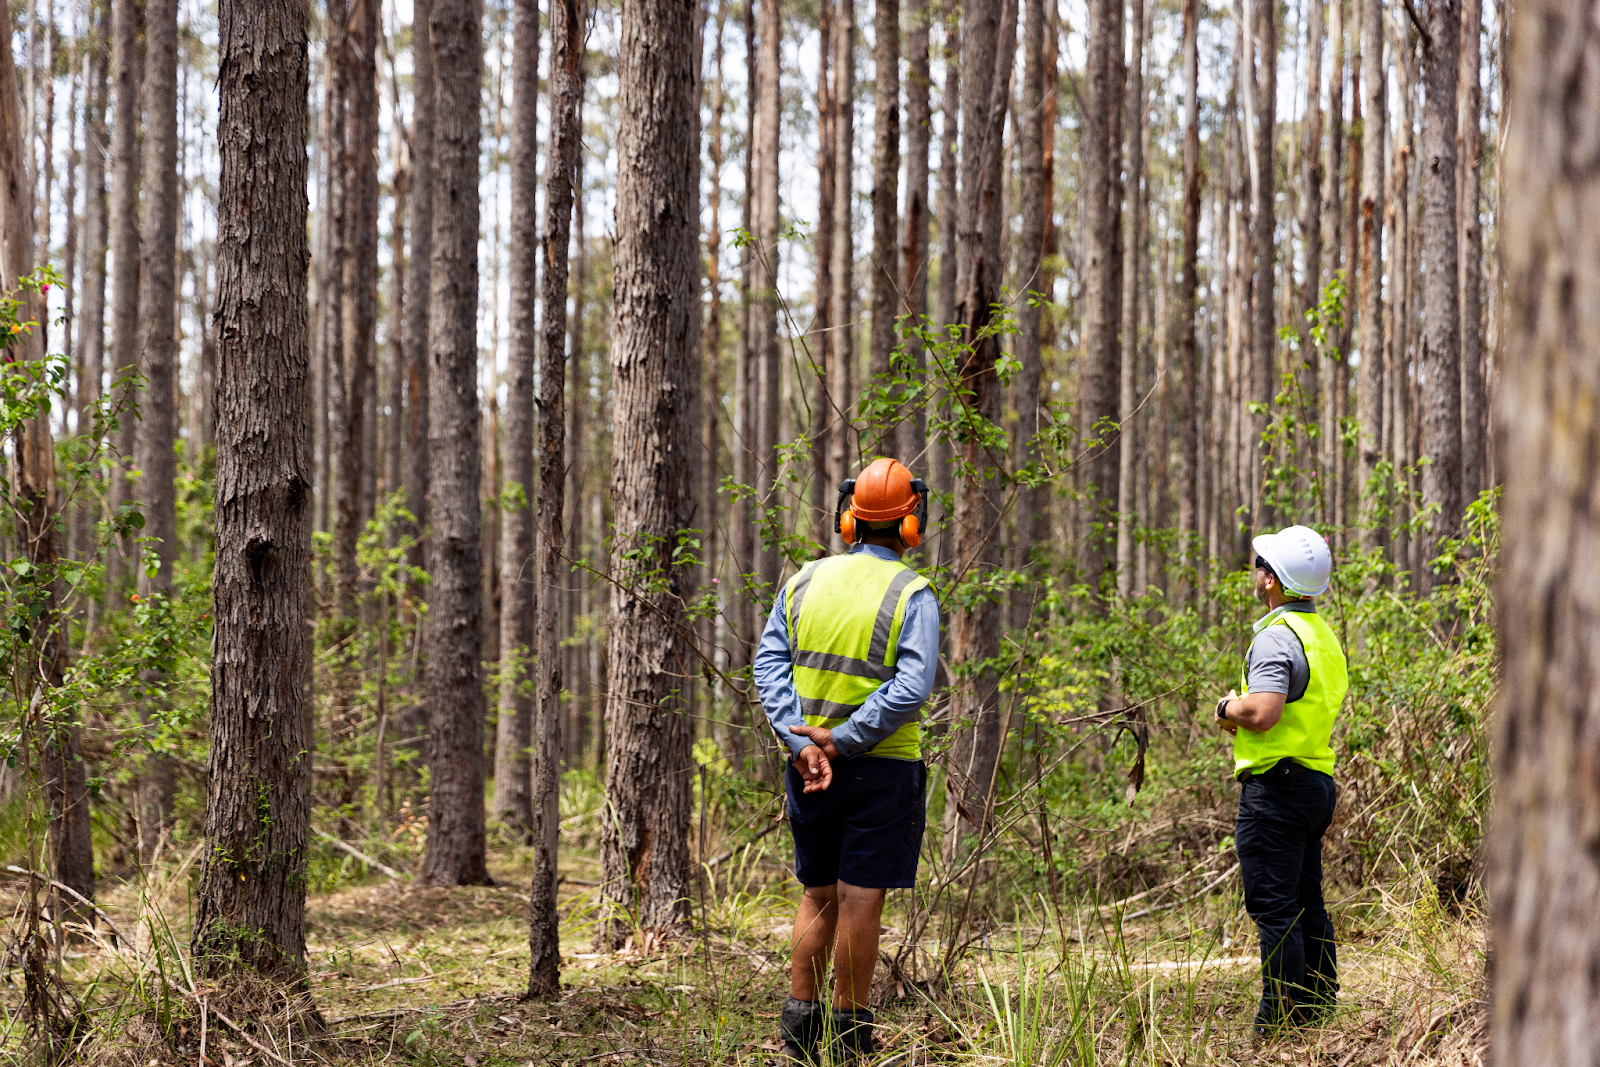 Forestry workers in hi-vis and safety helmets